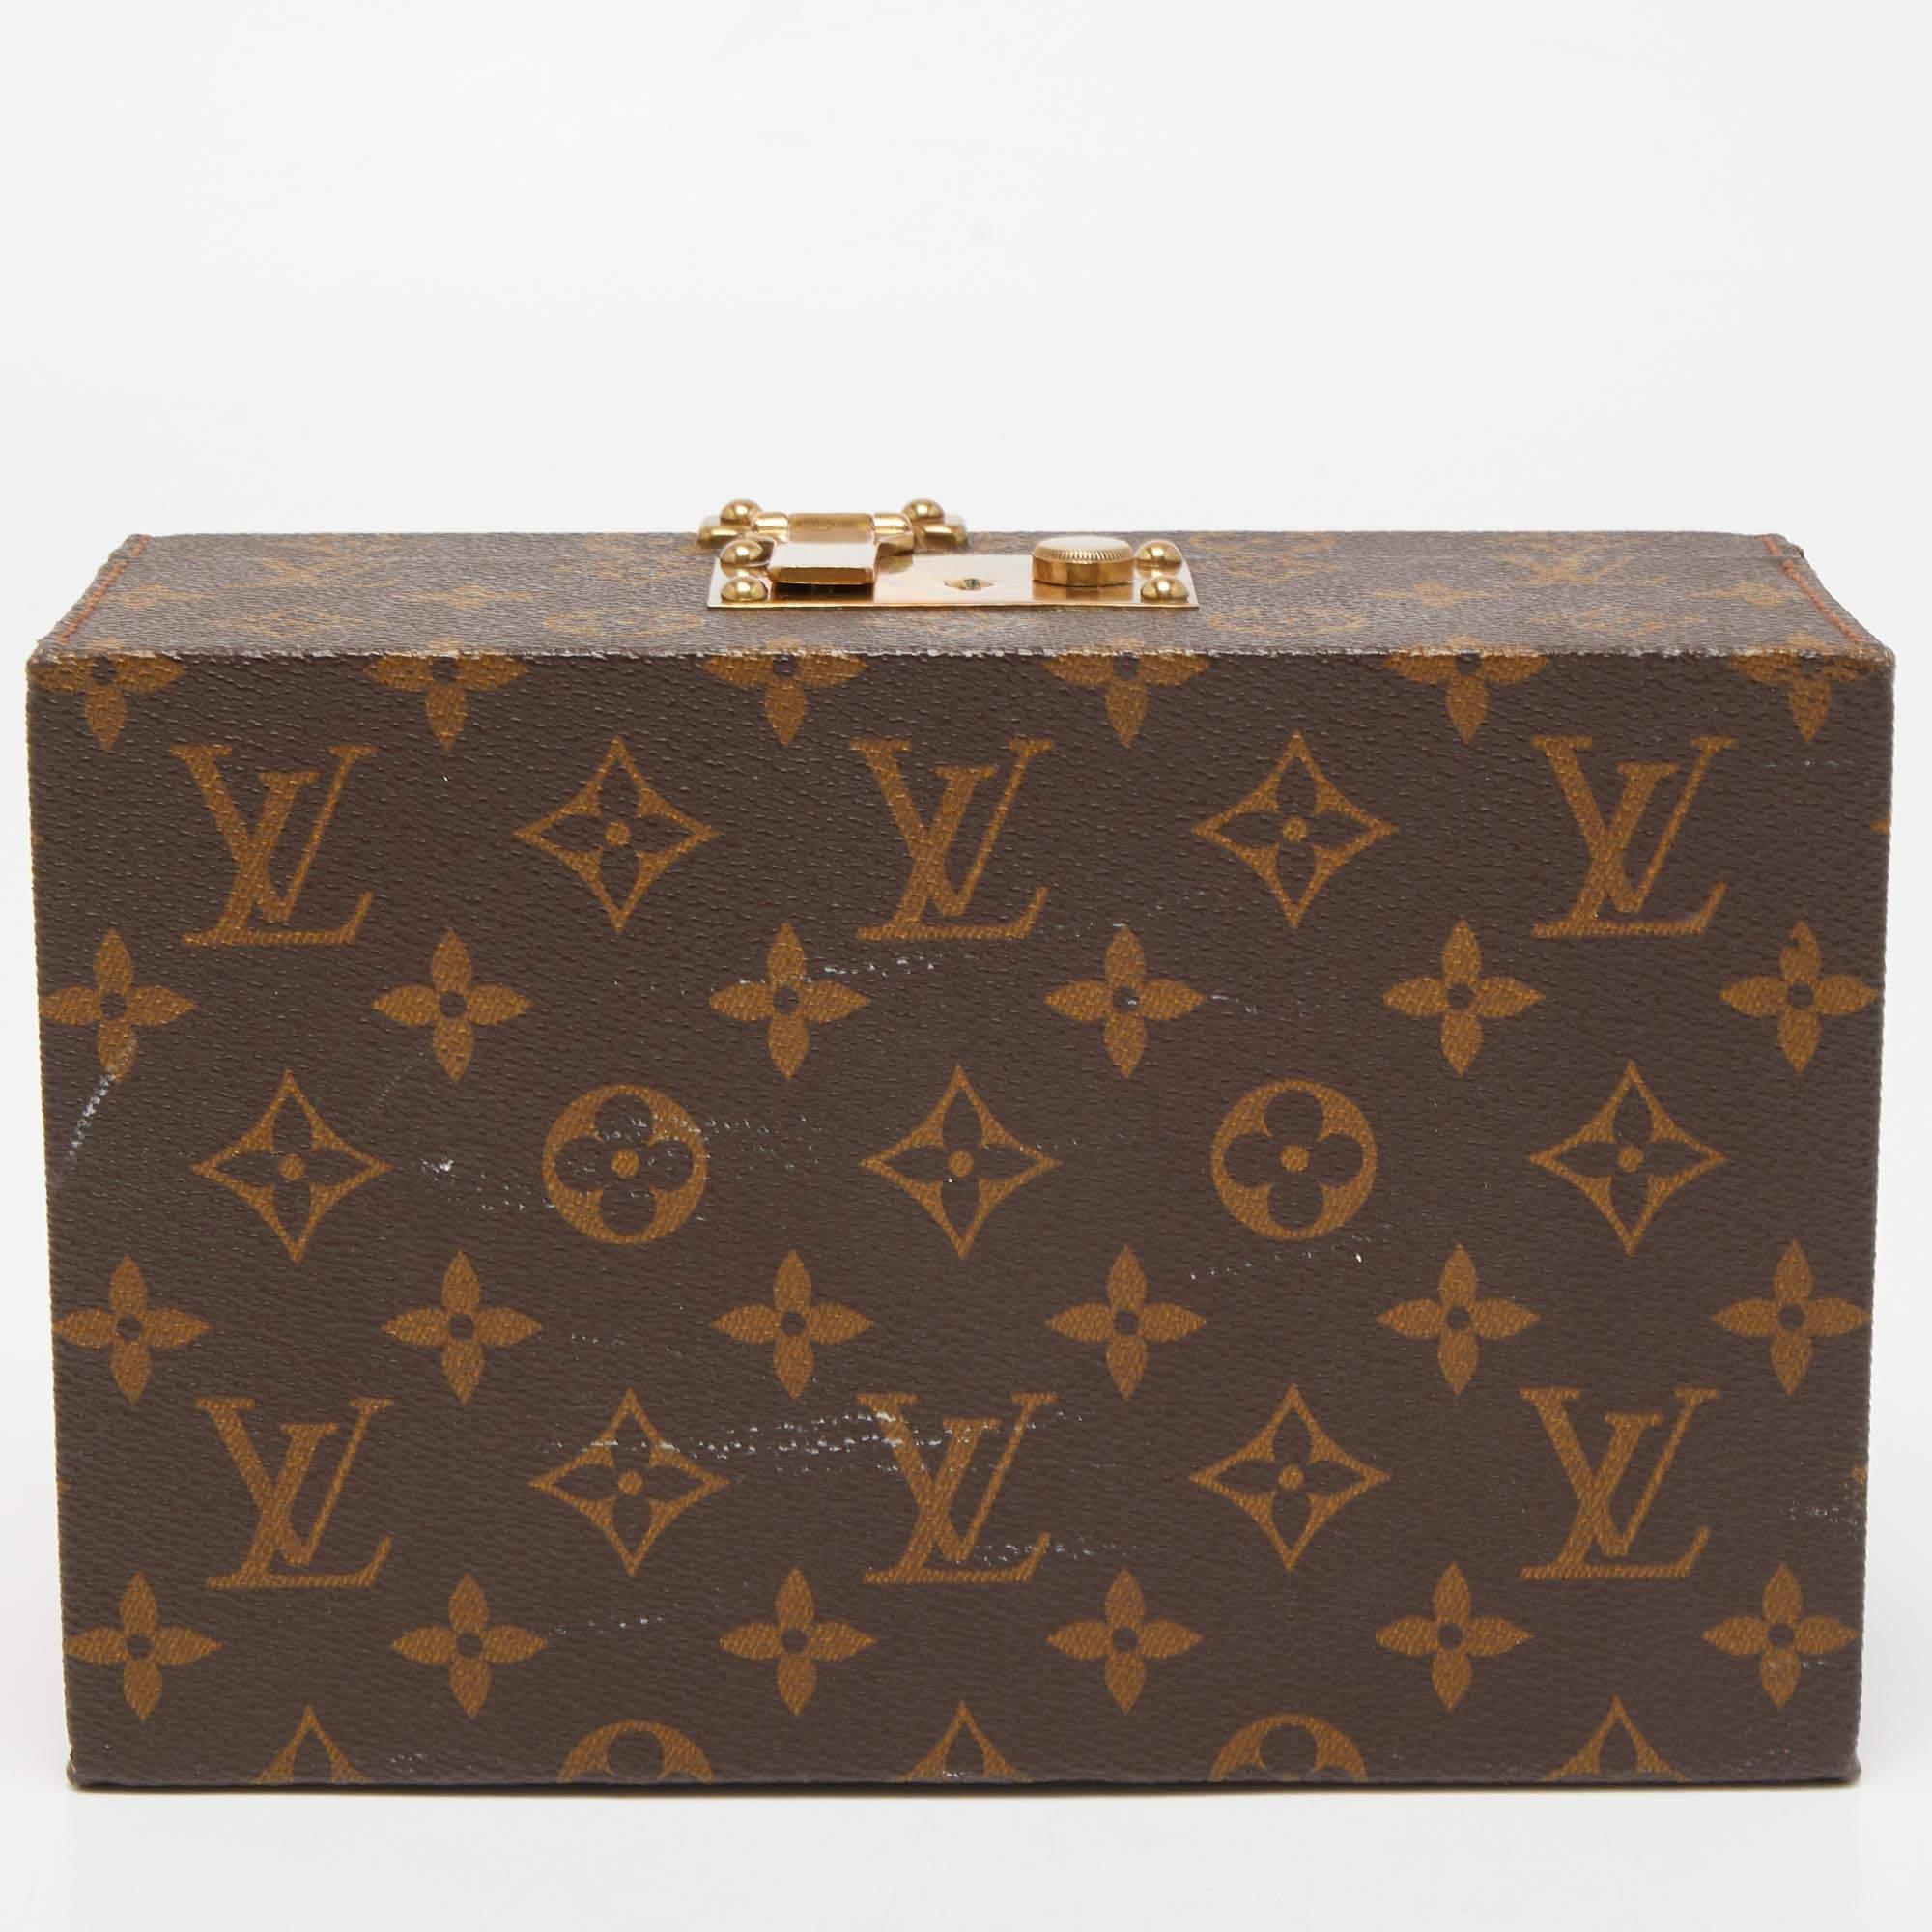 A vintage-inspired luxurious accessory, this jewelry case by the House of Louis Vuitton is crafted to offer the finest. Made from Monogram canvas, it features a sturdy silhouette with a sturdy top handle, leather trims, and gold-tone metal hardware.